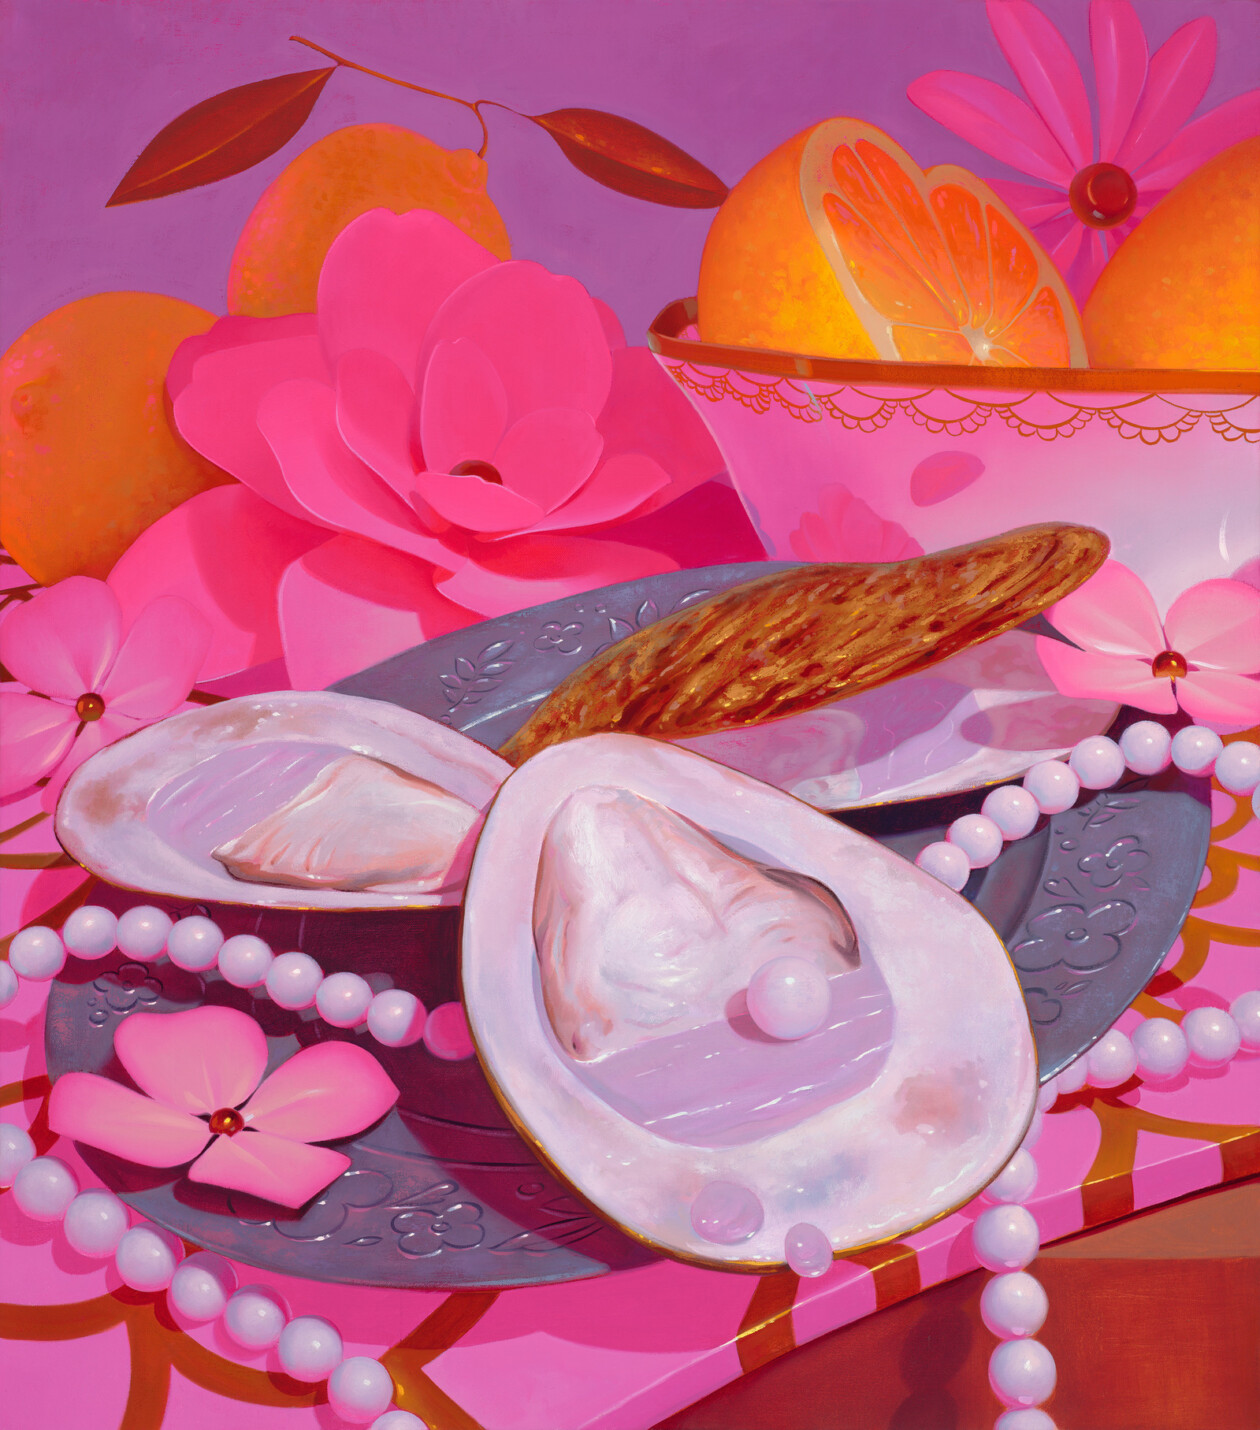 The Unique And Vibrant Still Life And Nature Paintings Of Canadian Artist Megan Ellen (5)